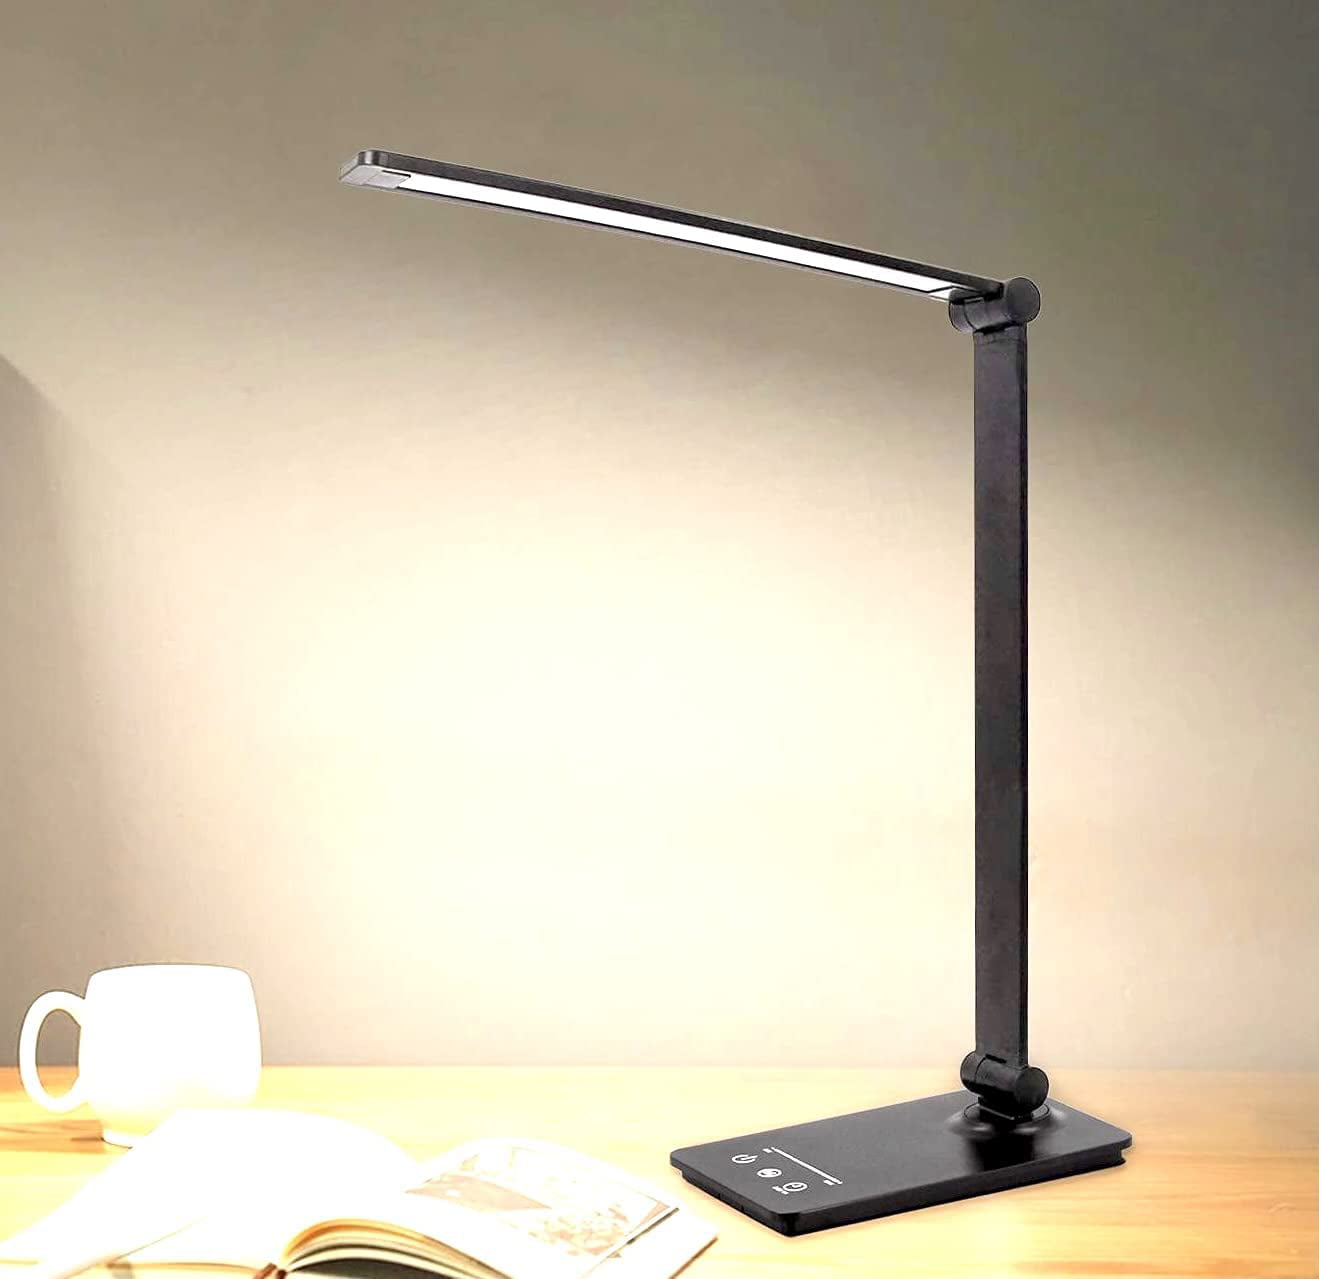 Desk Lamp,LED Eye-Caring Desk Lamp Dimmable Office Lamp with Levels x 3 Color Modes USB Charging Port Table Lamp for Bedroom,Office,Reading,Study